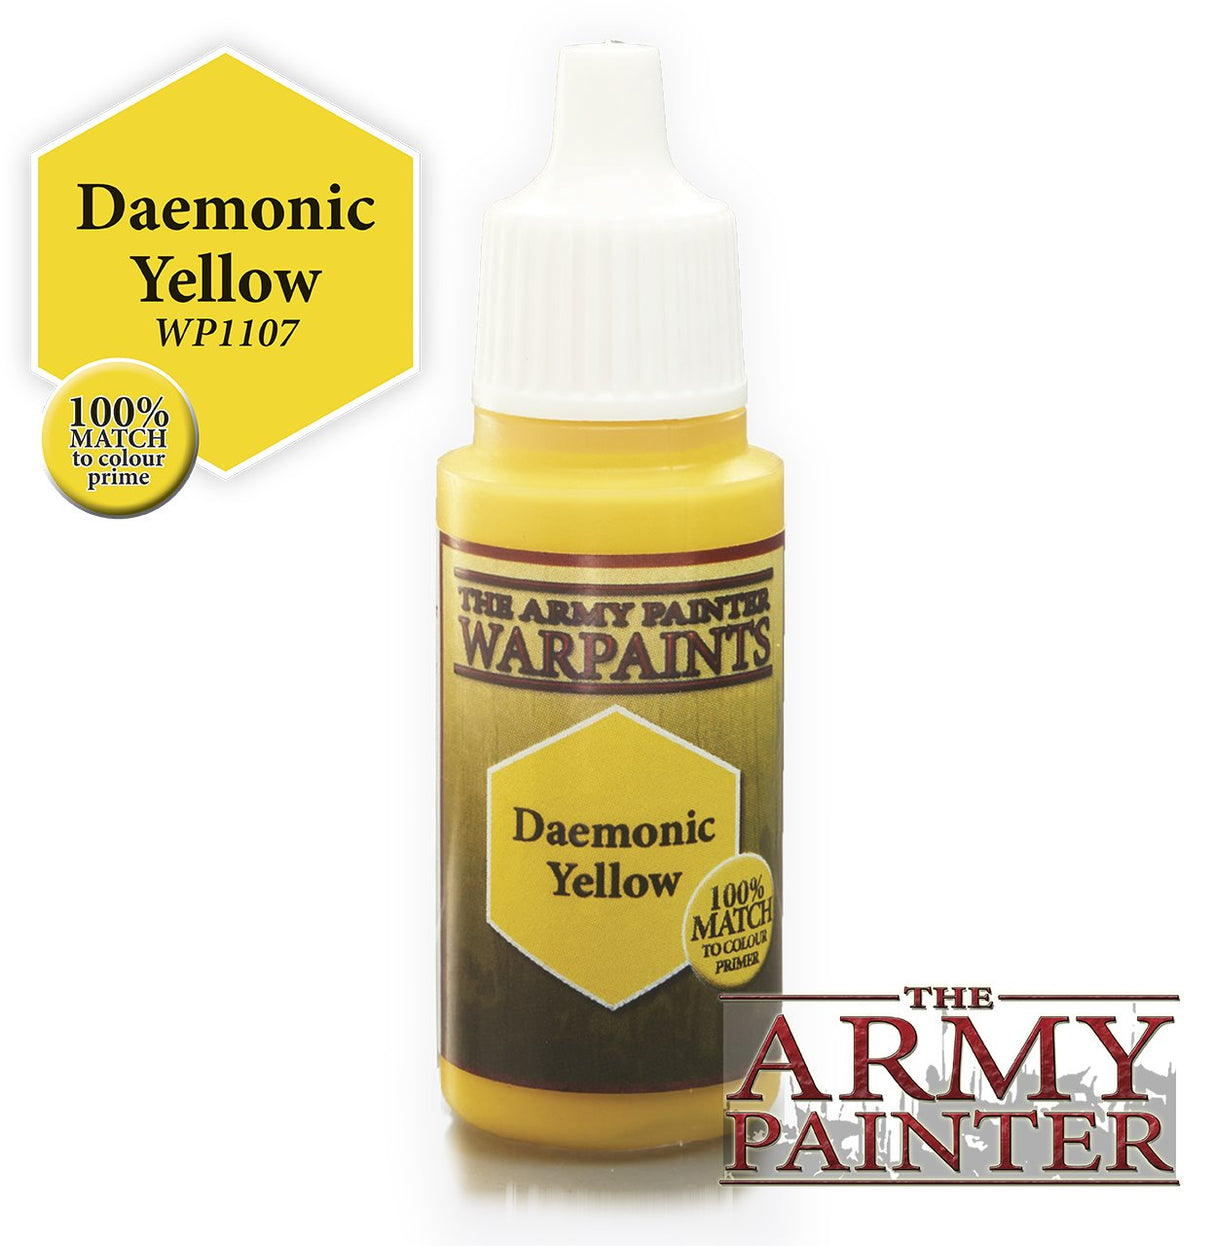 Army Painter WP1107 Daemonic Yellow The Army Painter PAINT, BRUSHES & SUPPLIES